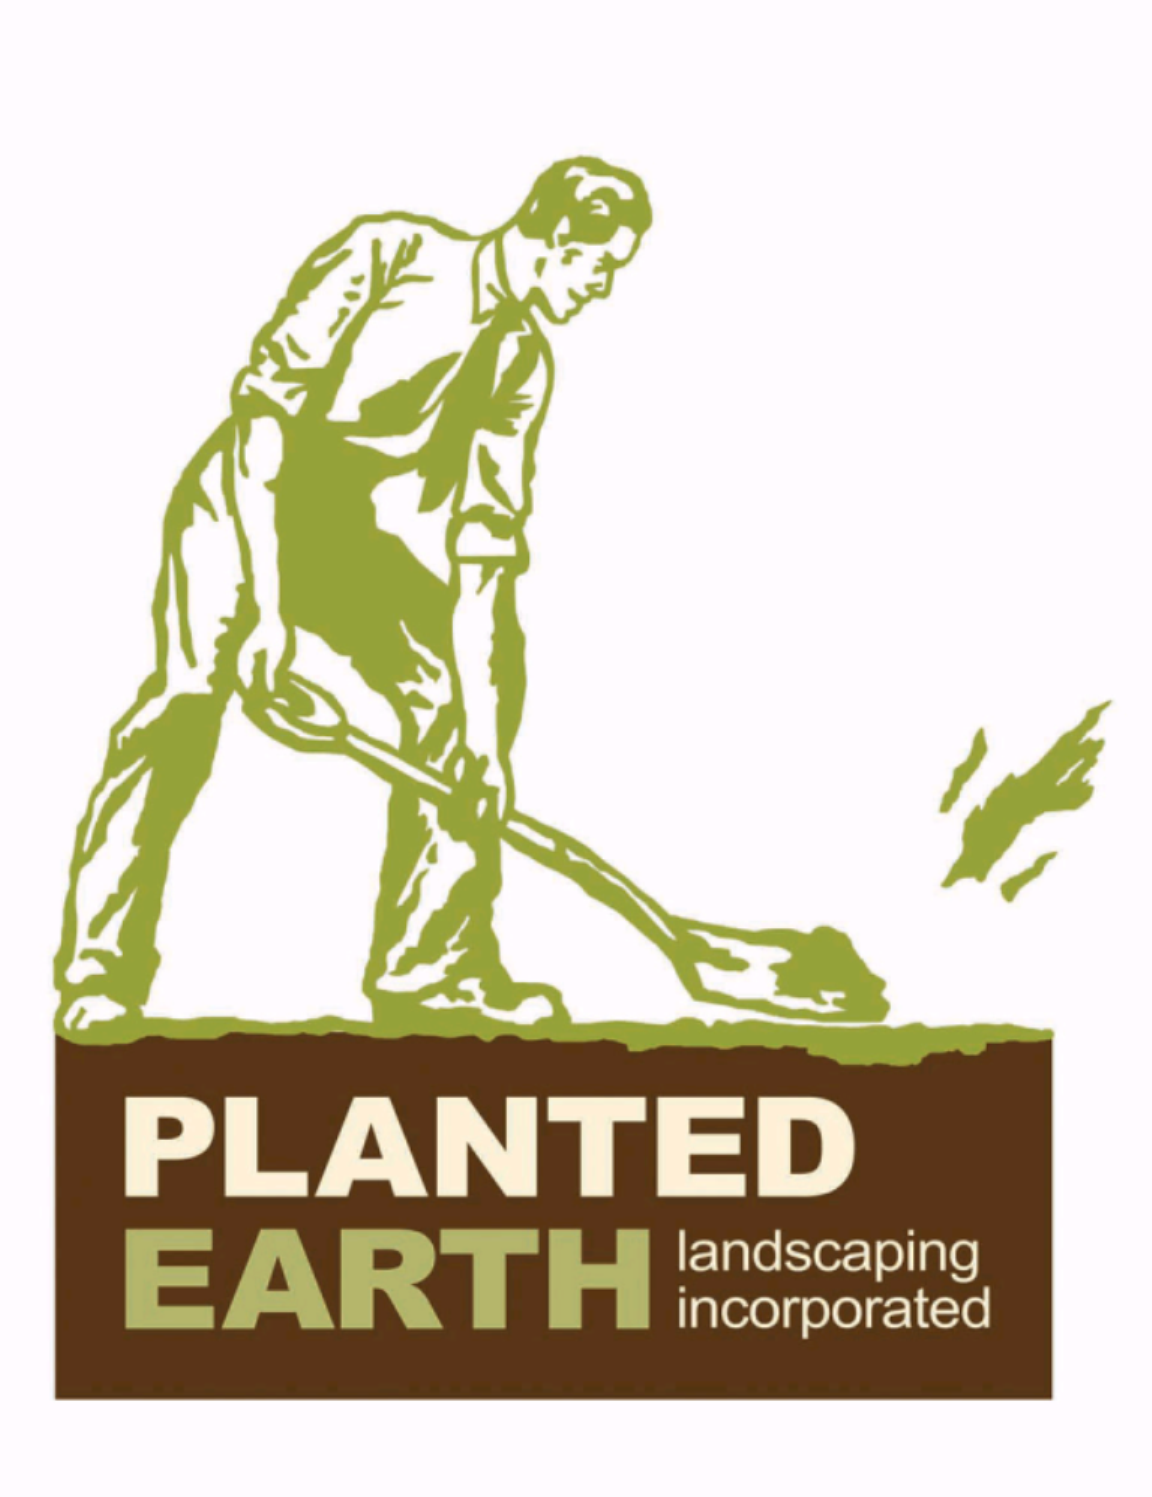 Planted Earth Landscaping Incorporated